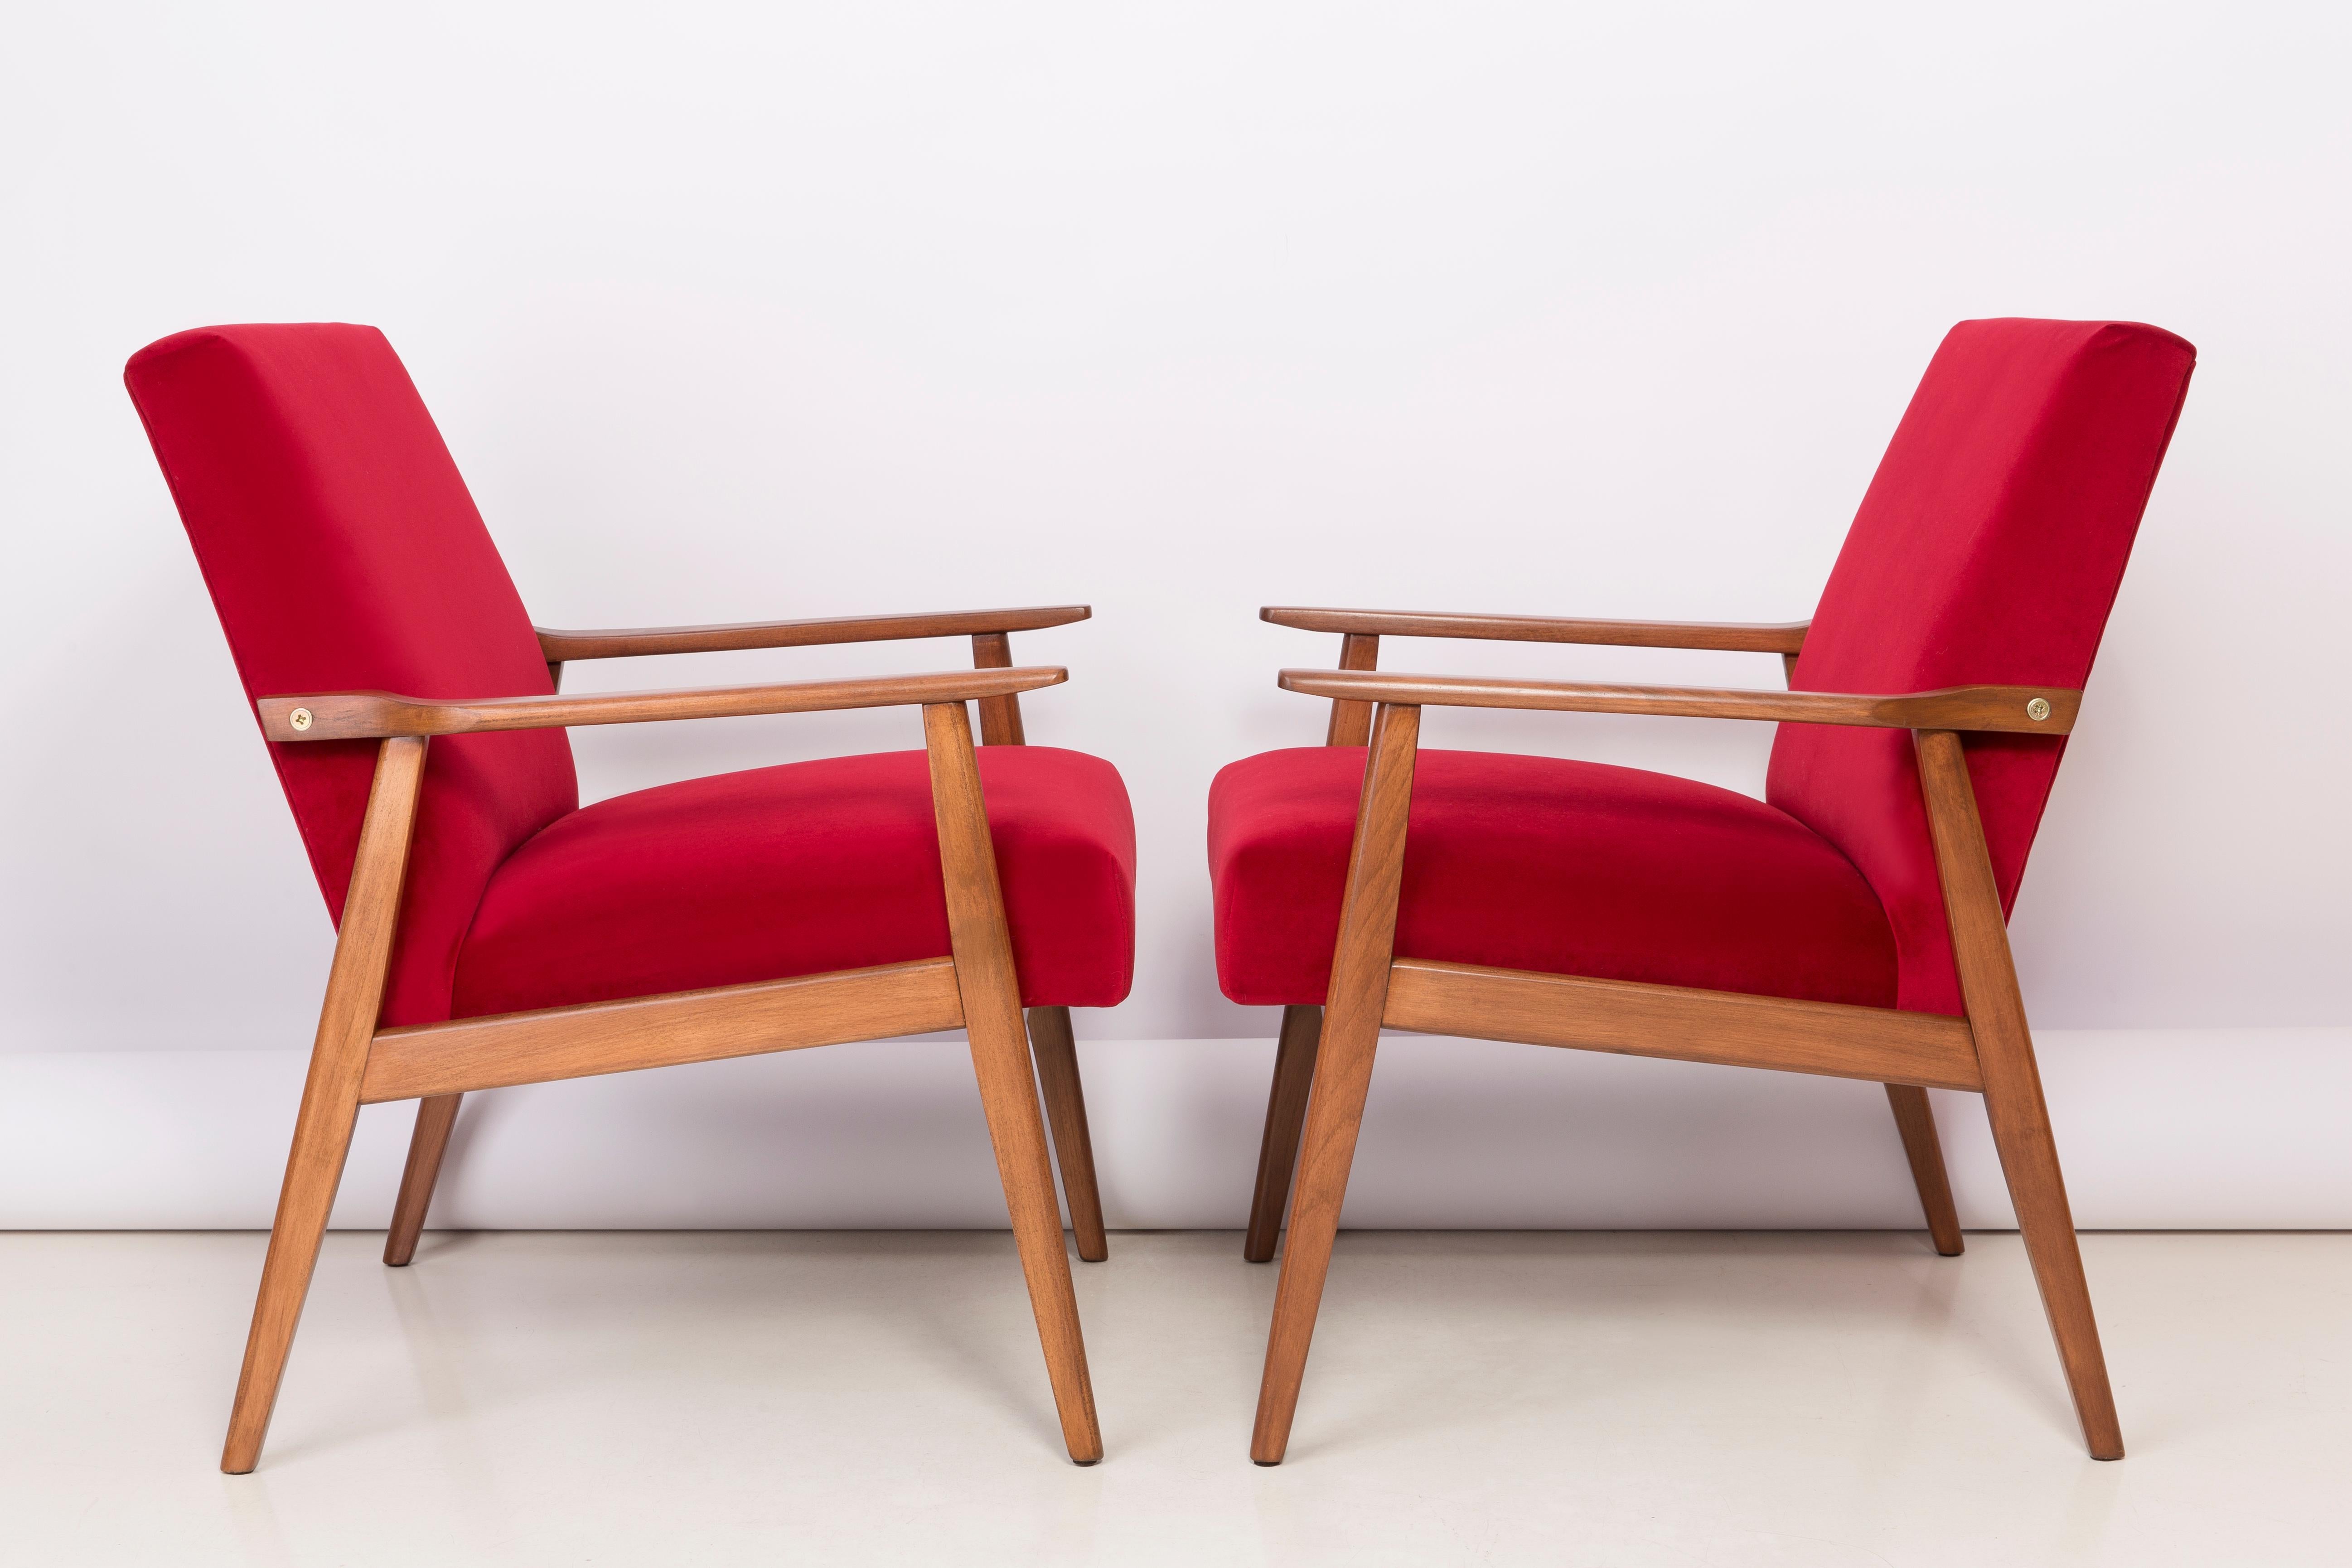 A beautiful, restored armchairs designed by Henryk Lis. Furniture after full carpentry and upholstery renovation. The fabric, which is covered with a backrest and a seat, is a high-quality red velvet upholstery (color 2926). The armchairs will be